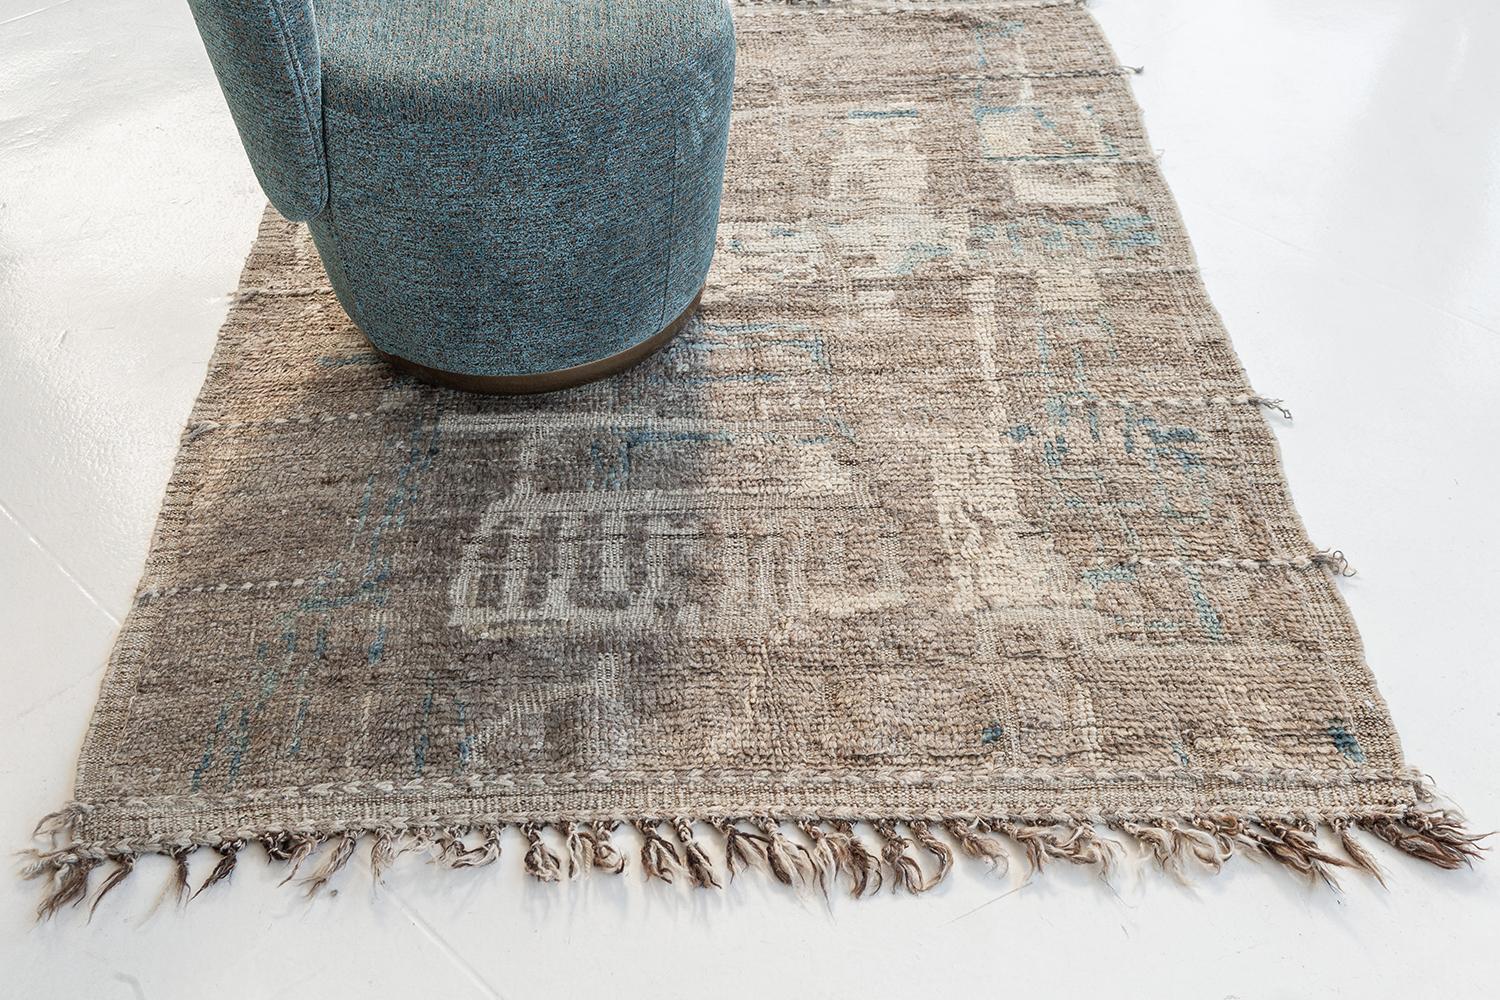 Meliska is a captivating textured rug with irregular motifs inspired by the Atlas Mountains of Morocco. Earthy tones of ivory, blue, and chocolate brown surrounded by umber brown shag work cohesively to make for a great contemporary interpretation